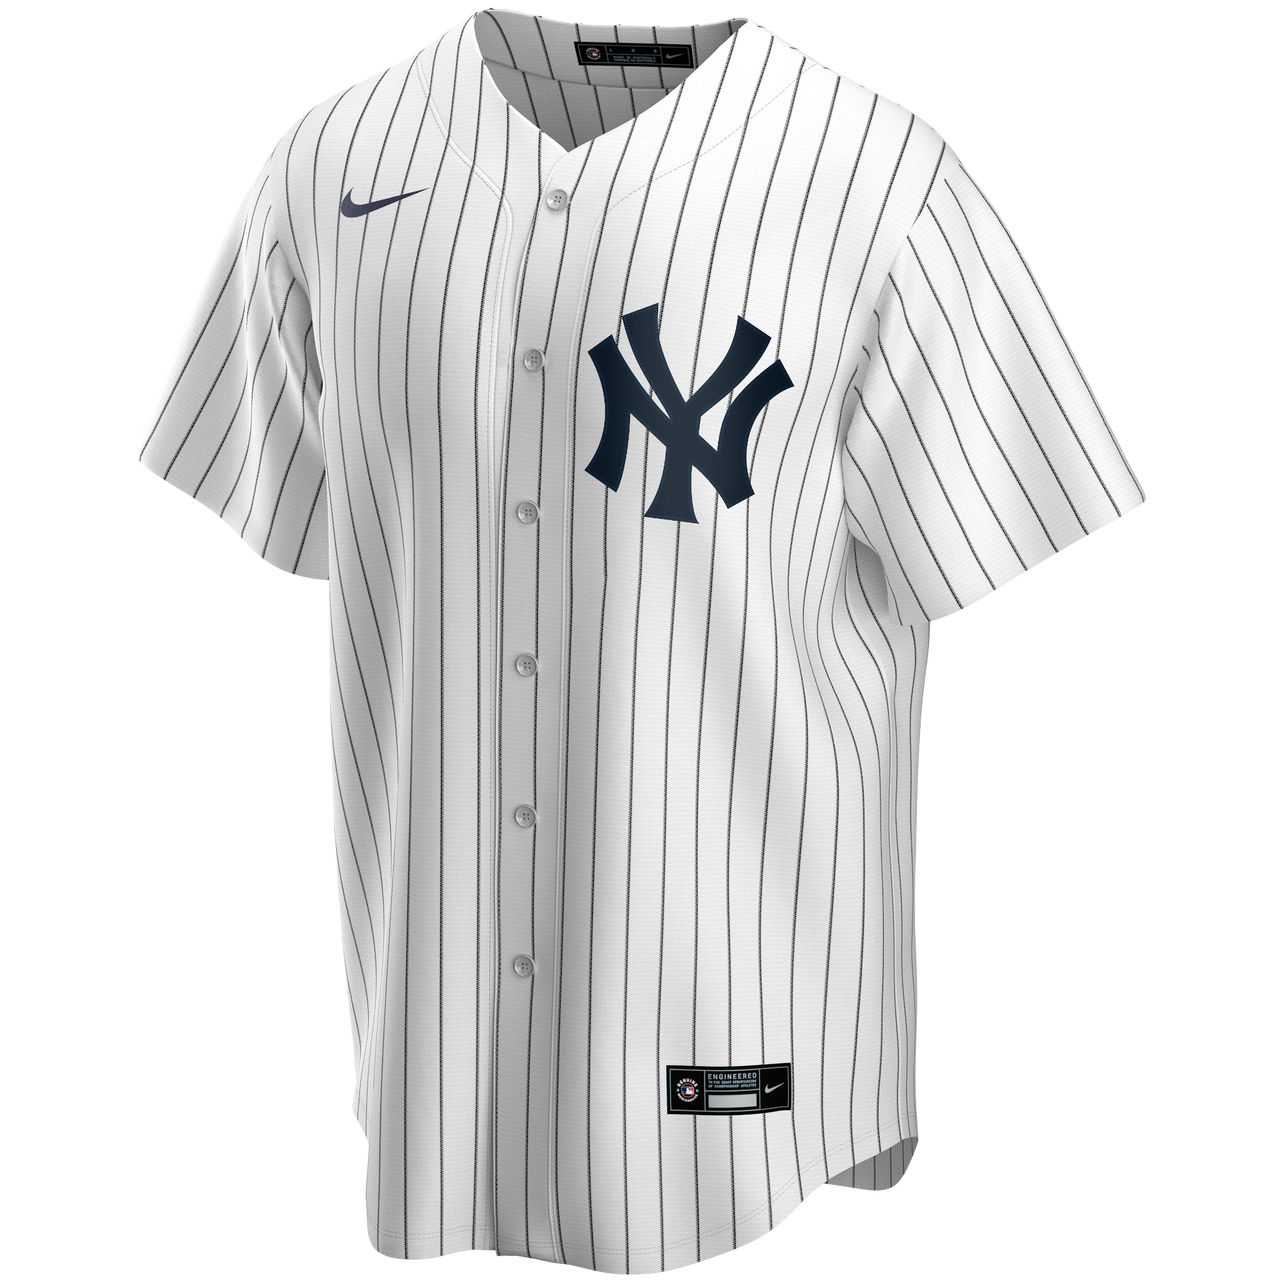 anthony rizzo jersey number yankees